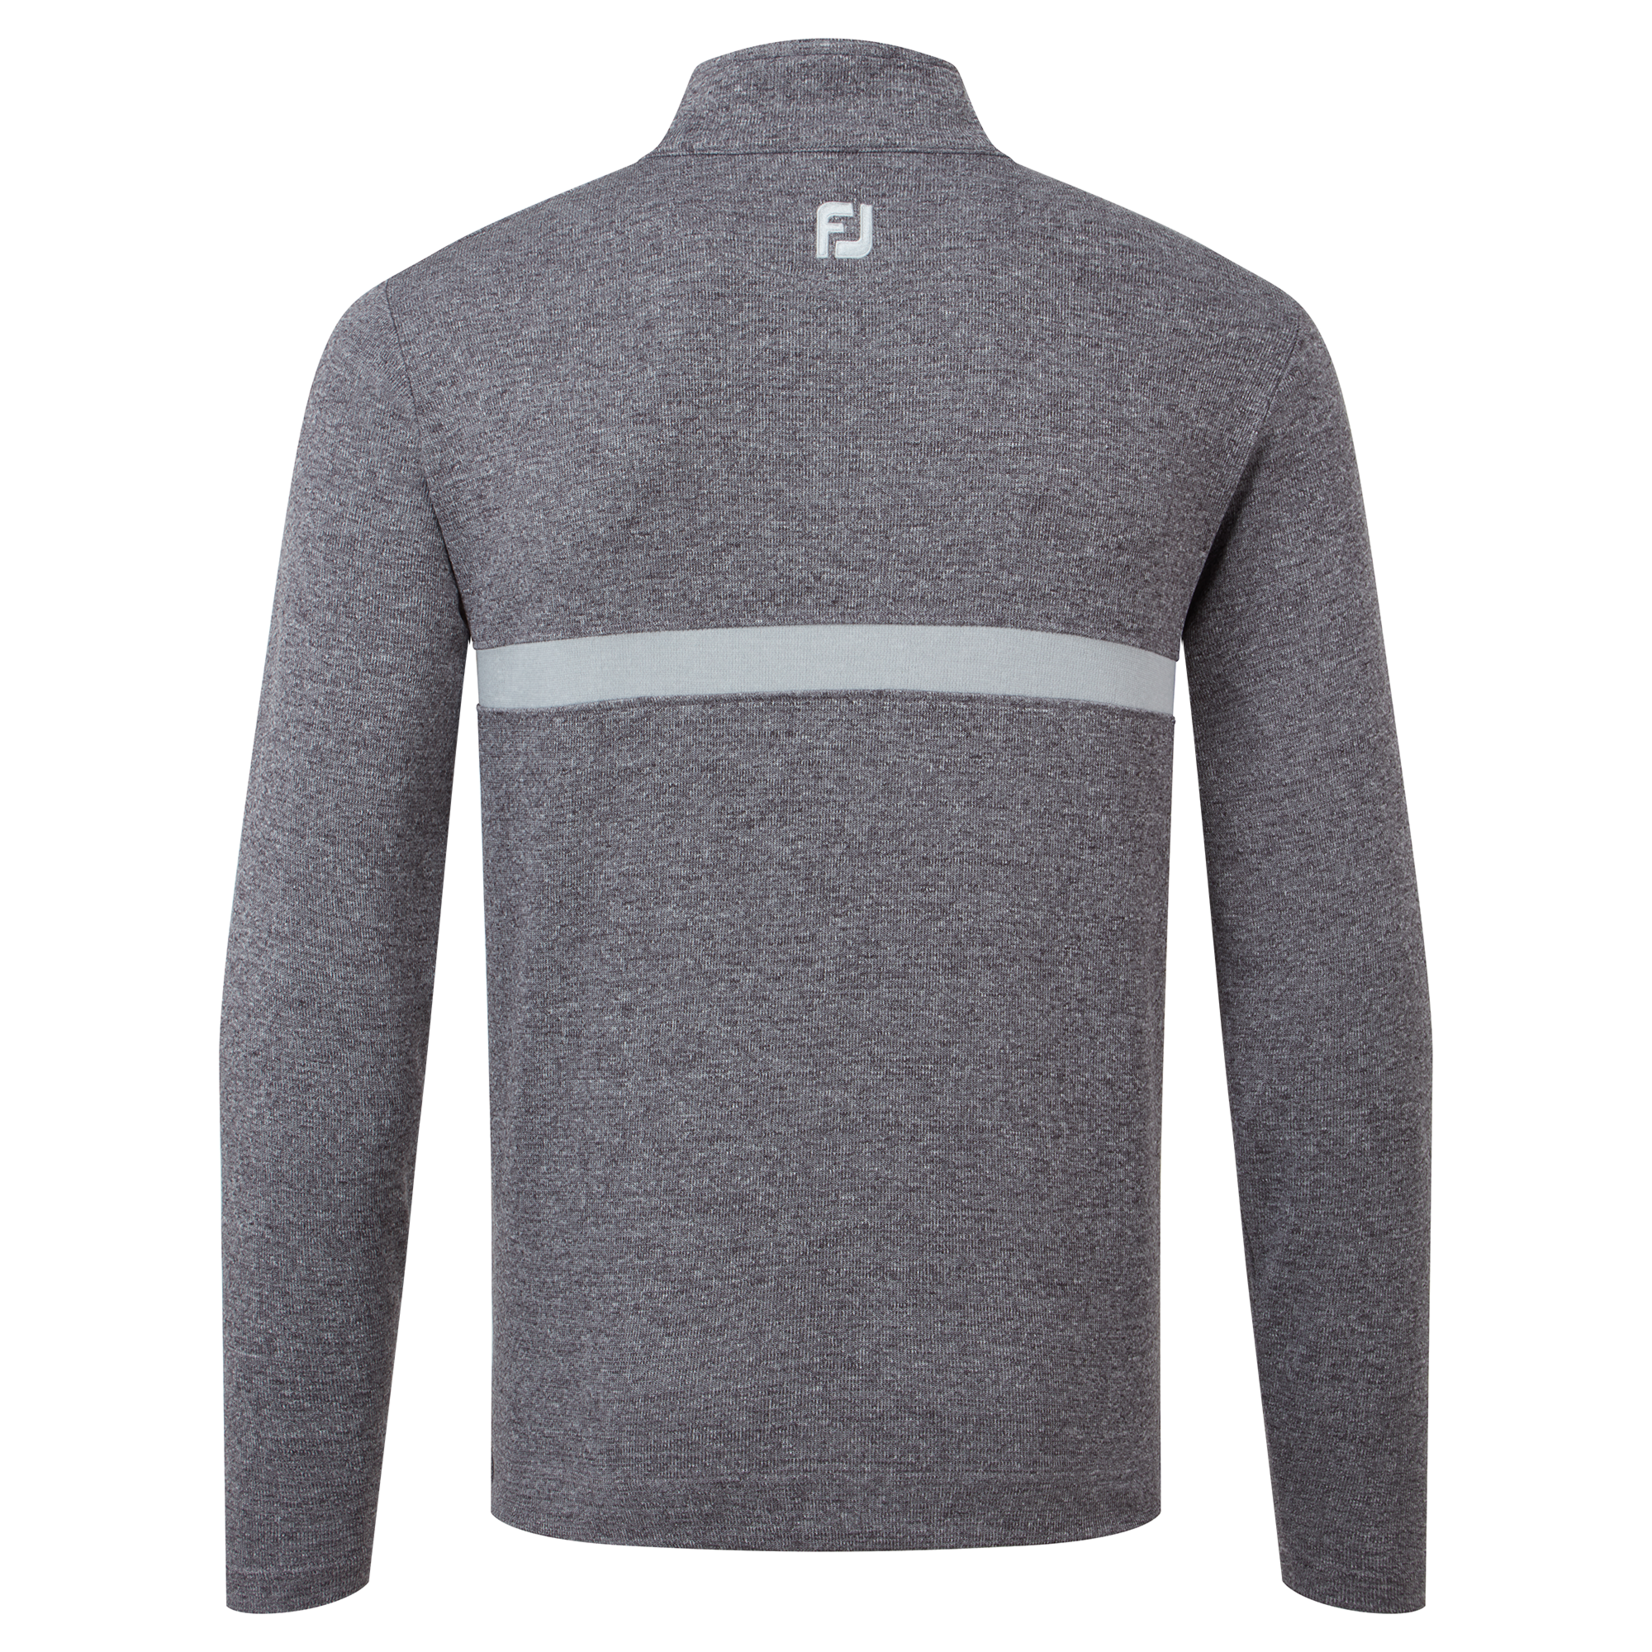 Footjoy Footjoy Inset Stripe Chill-Out - Heather Gravel/Heather Grey Cliff